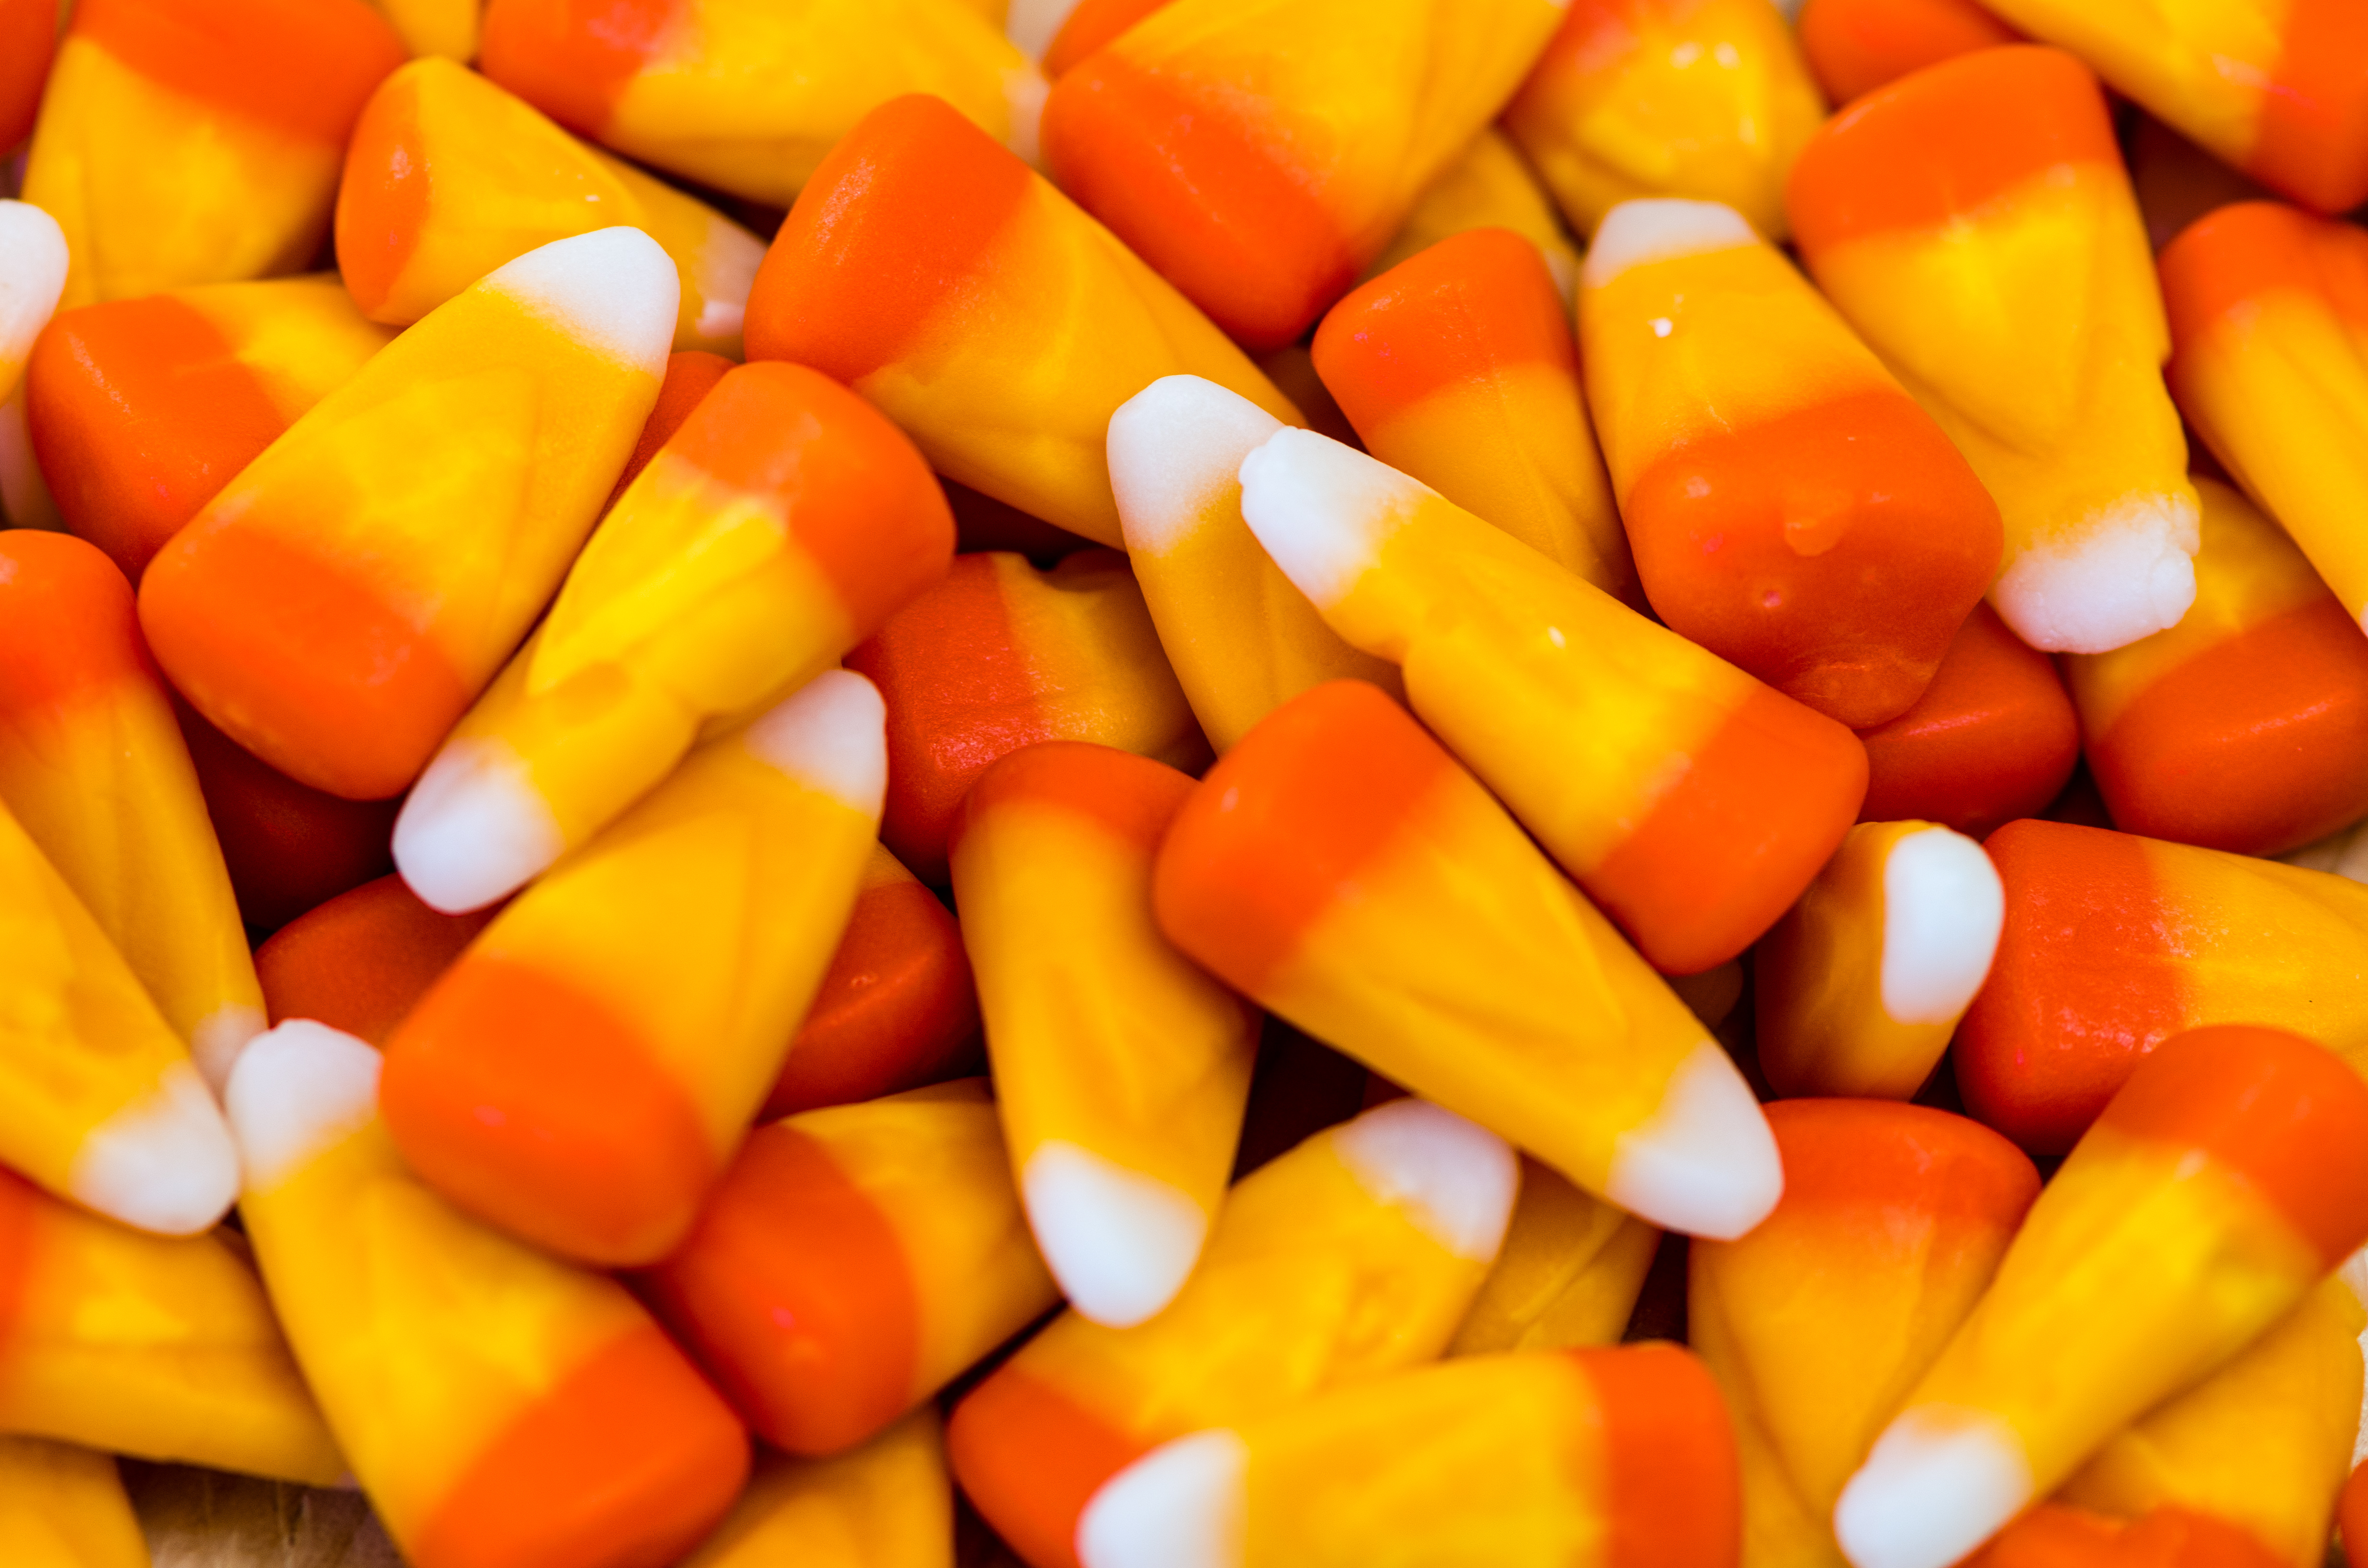 20 Creative Fall Photography Ideas - Candy Corn by m01229 via Flickr | https://www.roseclearfield.com